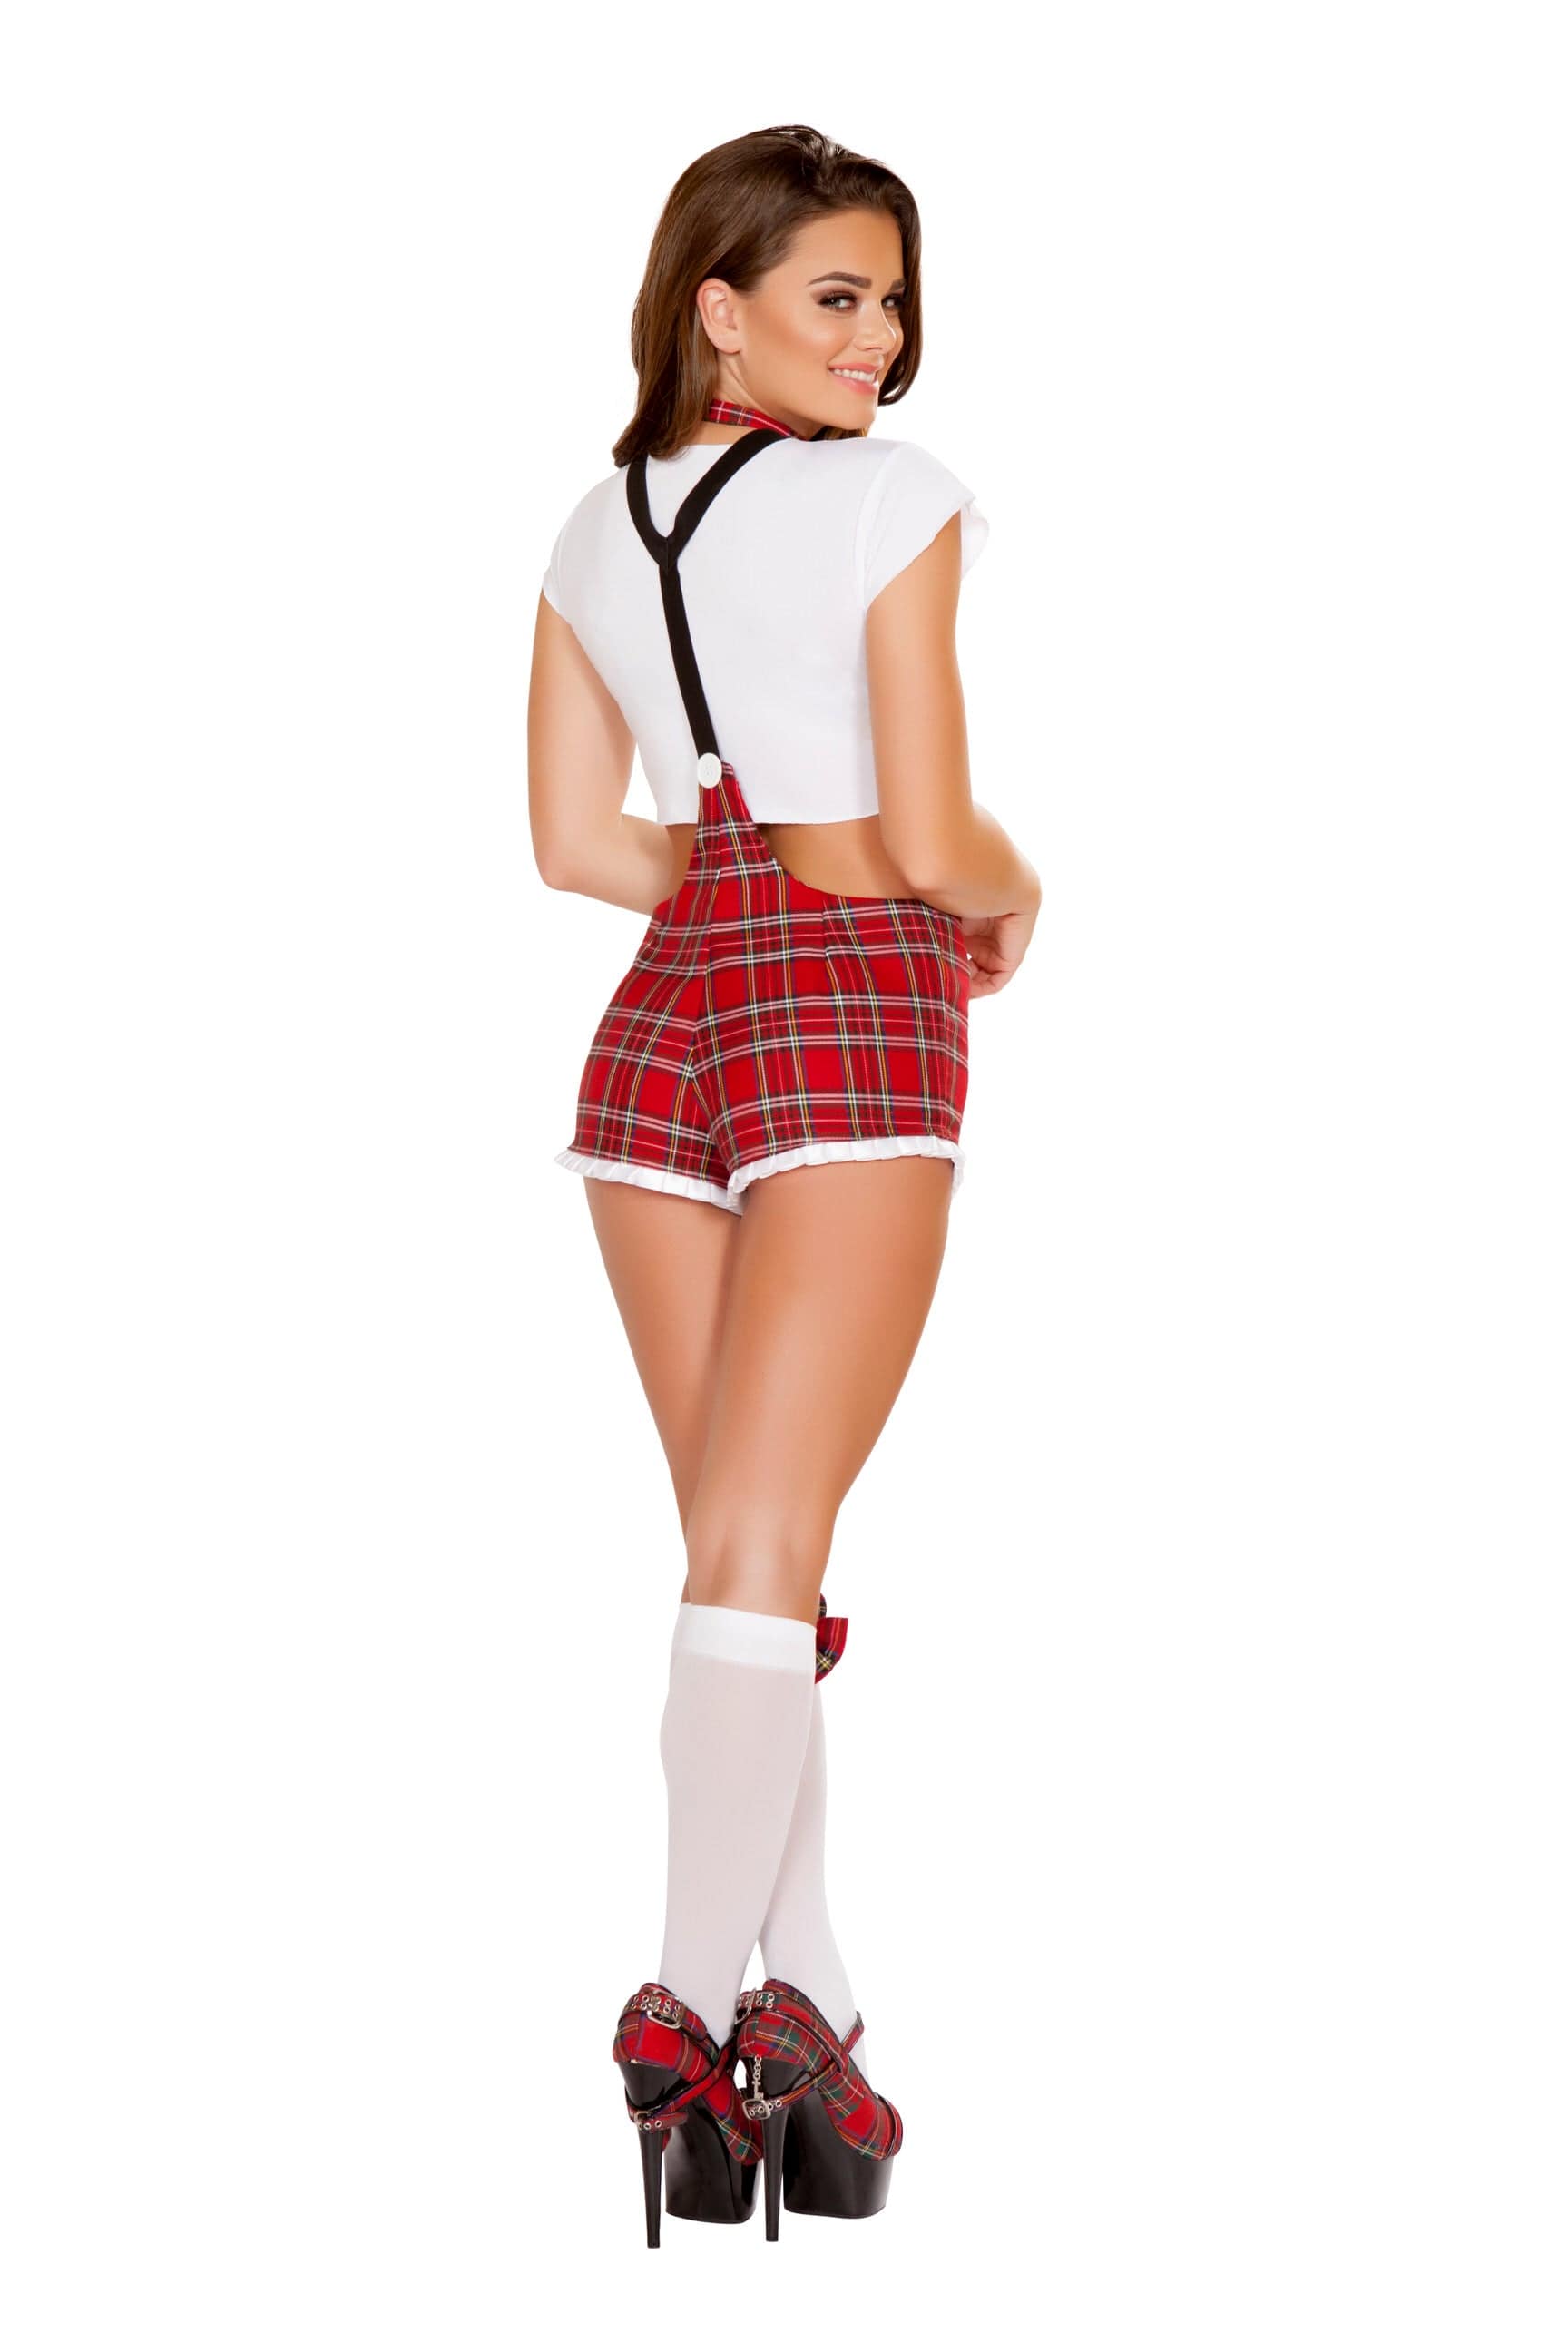 Elegant Moments Red / Medium Sexy Teacher's Pet School Girl 2 Pc Costume SHC-4755-M-R Extra Credit Cutie School Girl Costume | ELEGANT MOMENTS 99108 Apparel & Accessories > Clothing > One Pieces > Jumpsuits & Rompers